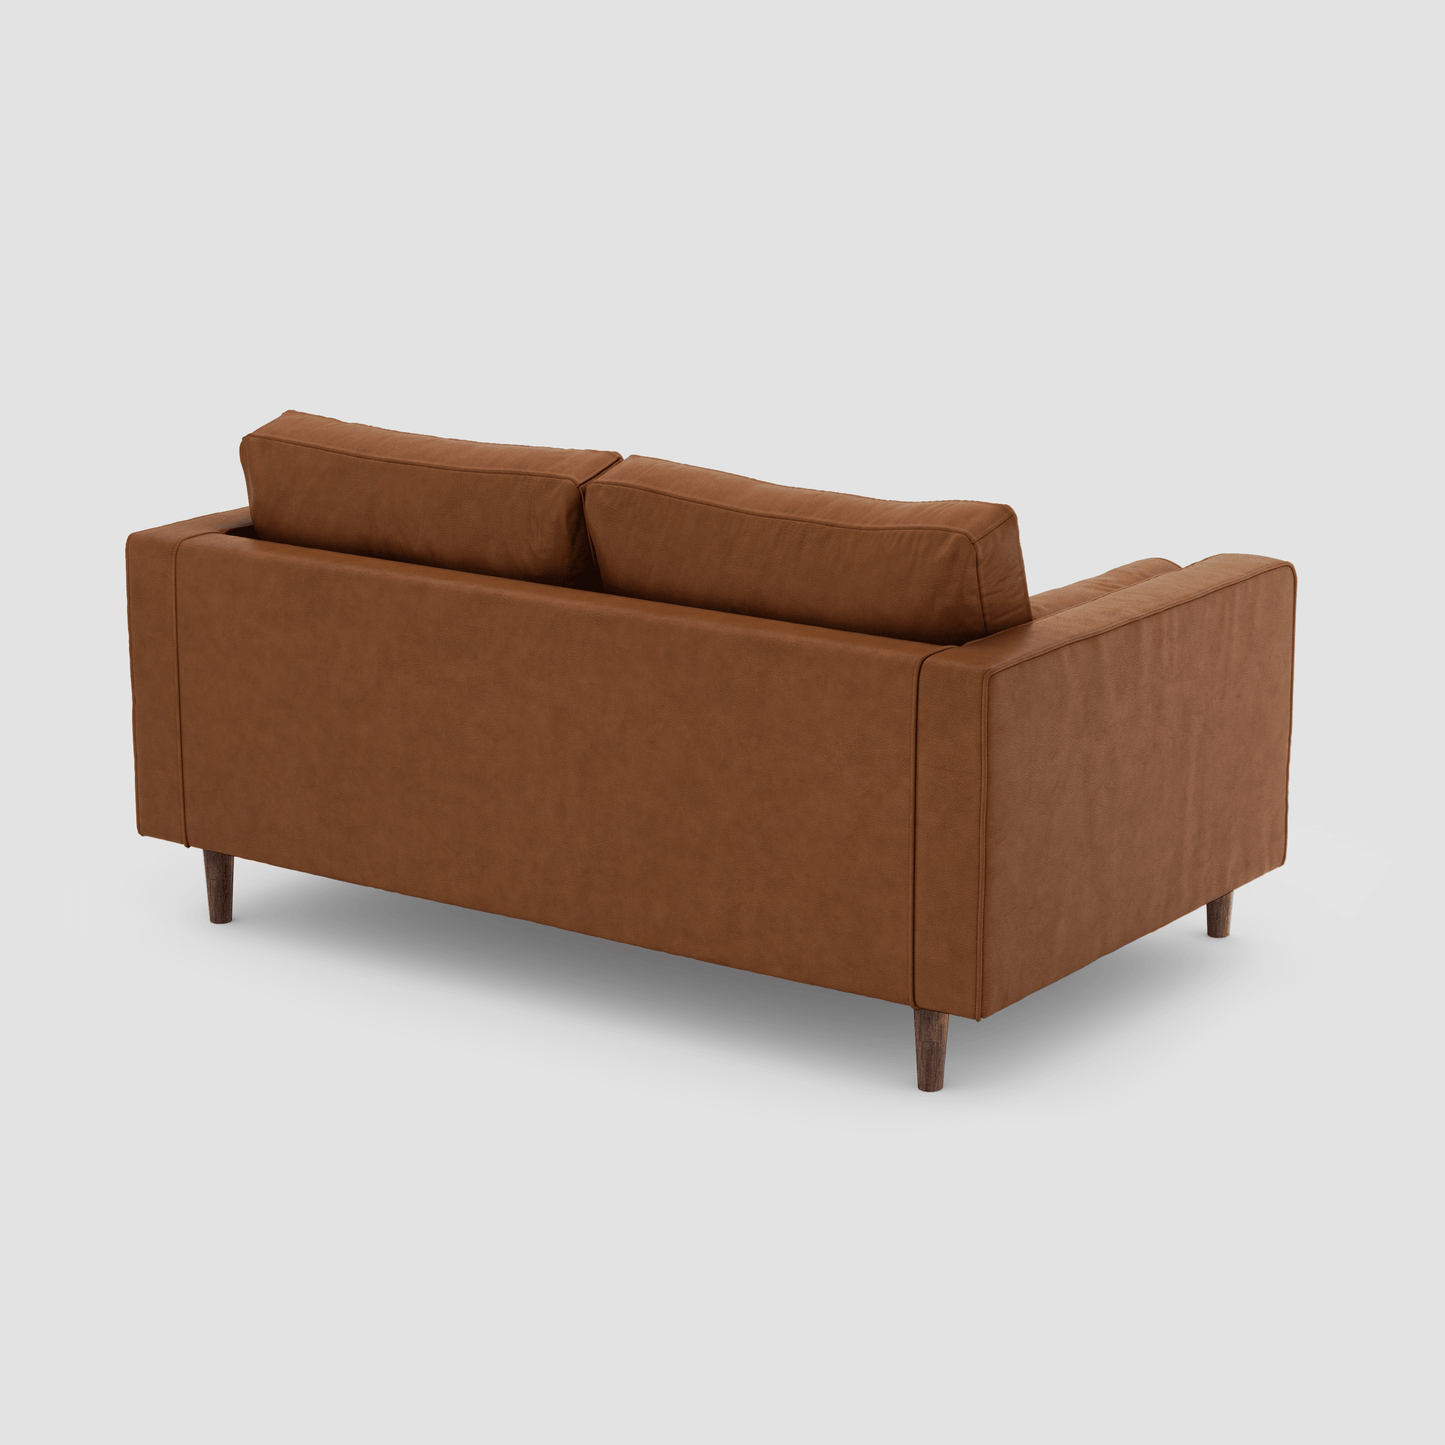 Dalton Large Two Seater Sofa - Flown the Coop